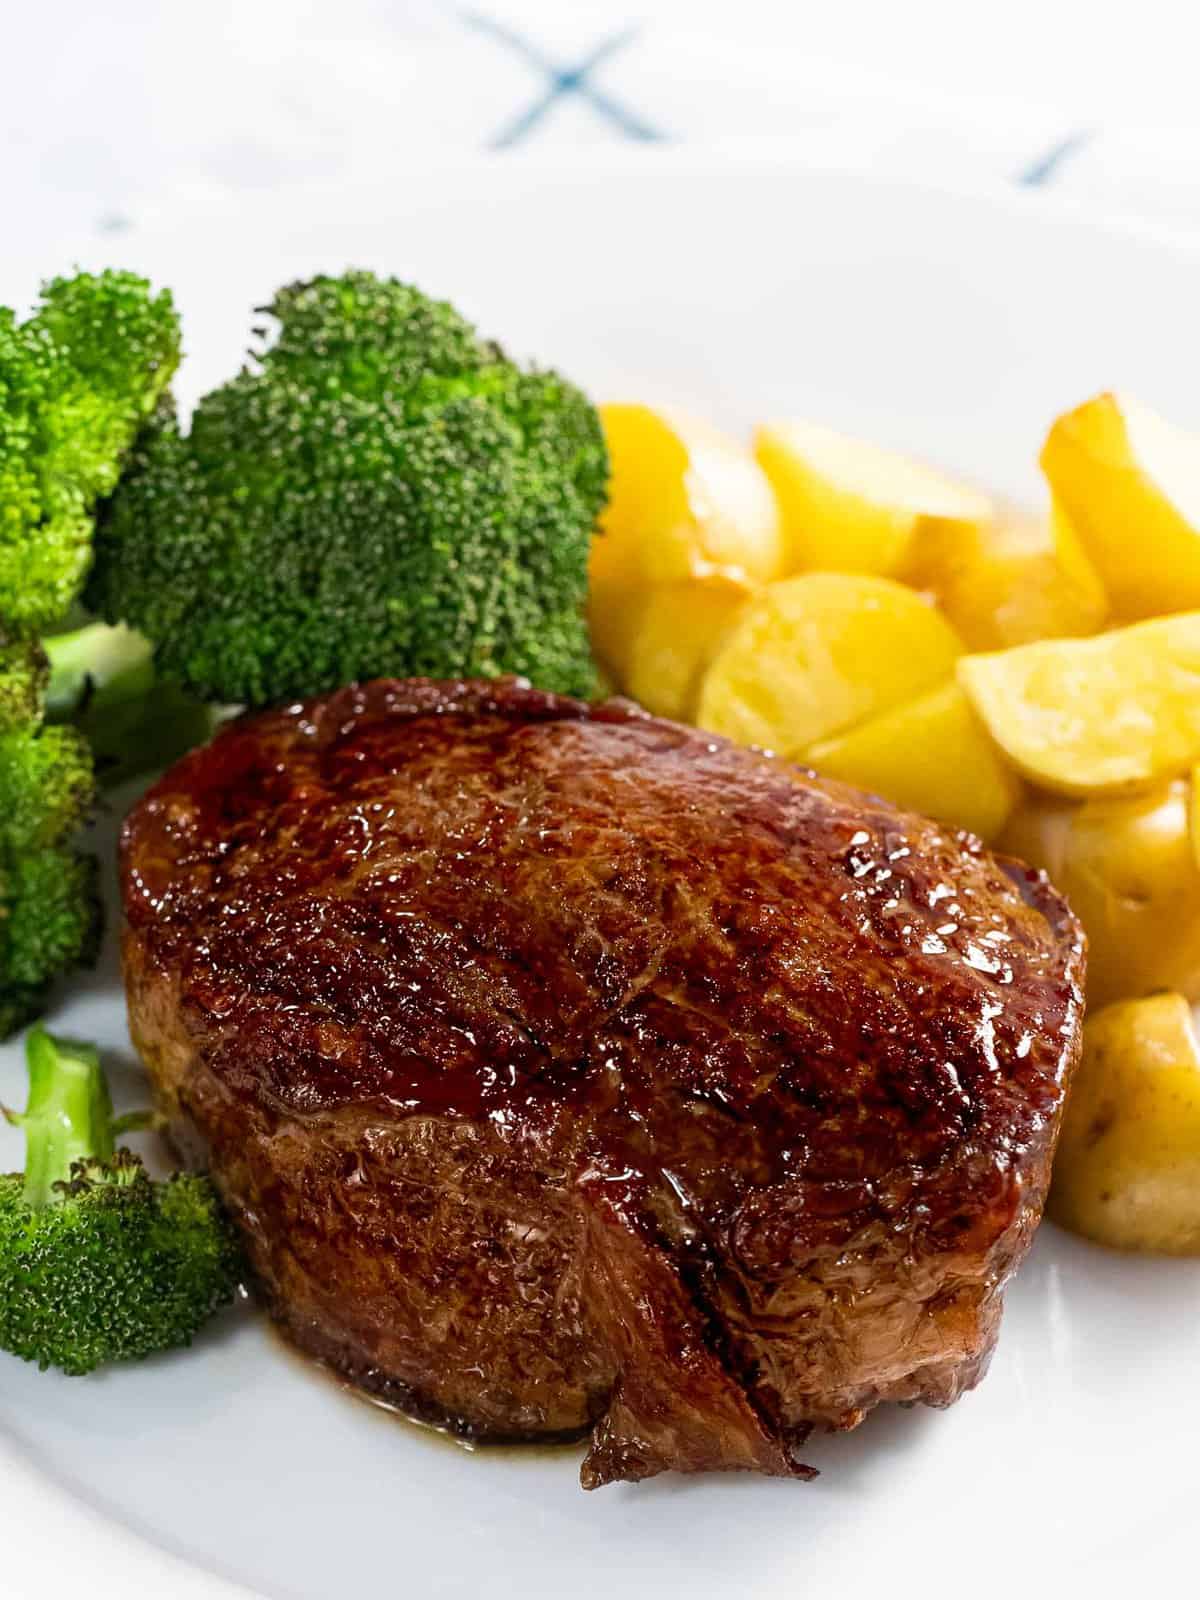 Reverse sear steak with a brown, crispy crust with broccoli and potatoes.